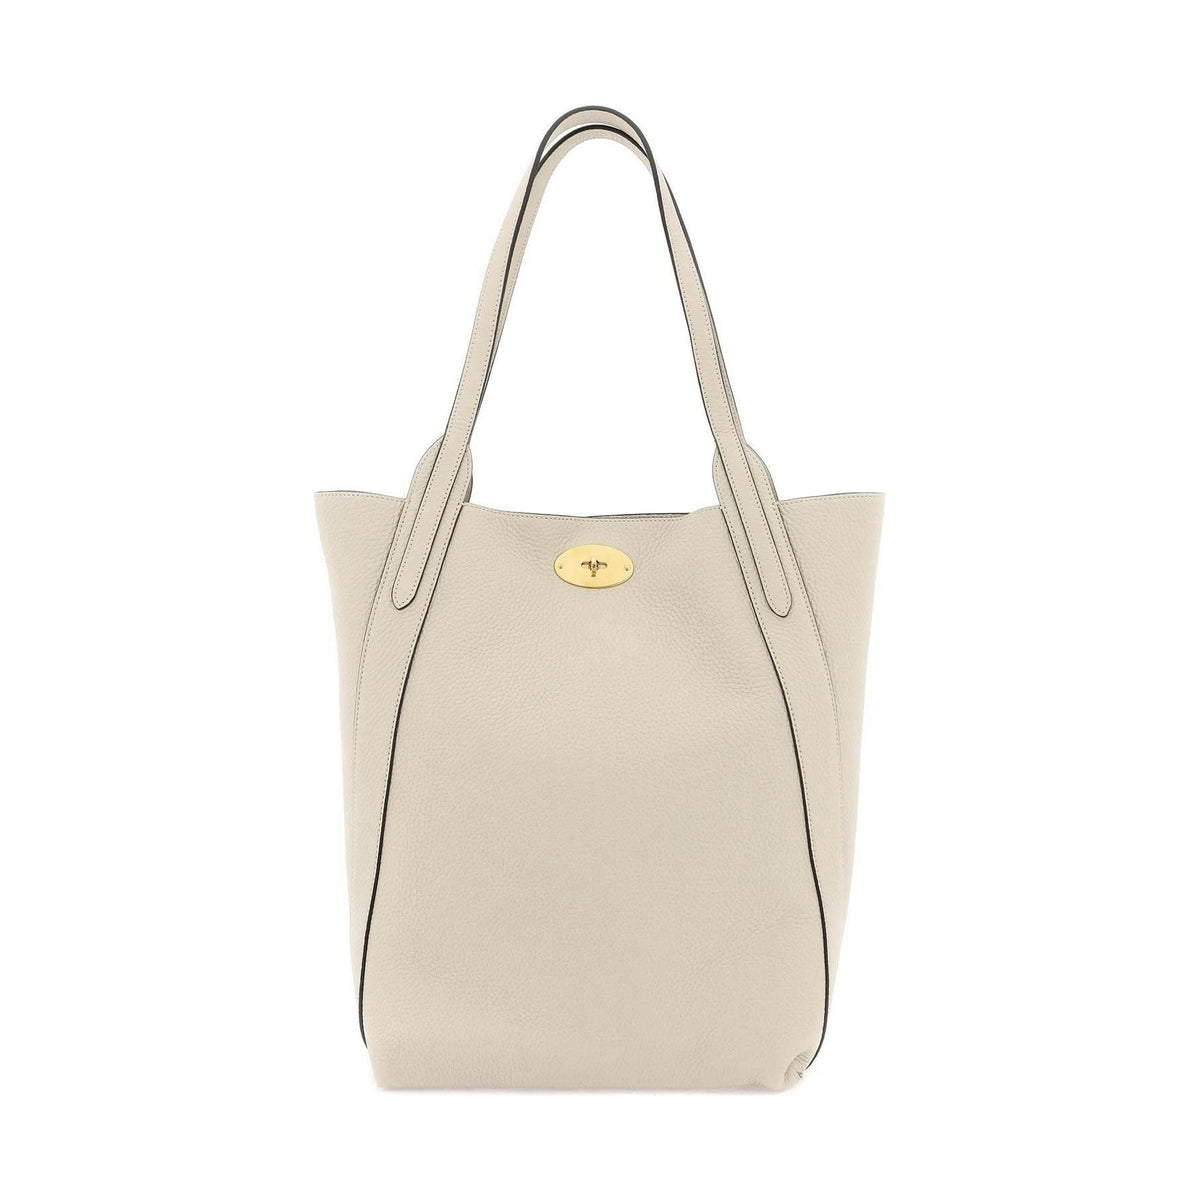 MULBERRY - Grained Leather Bayswater Tote Bag - JOHN JULIA